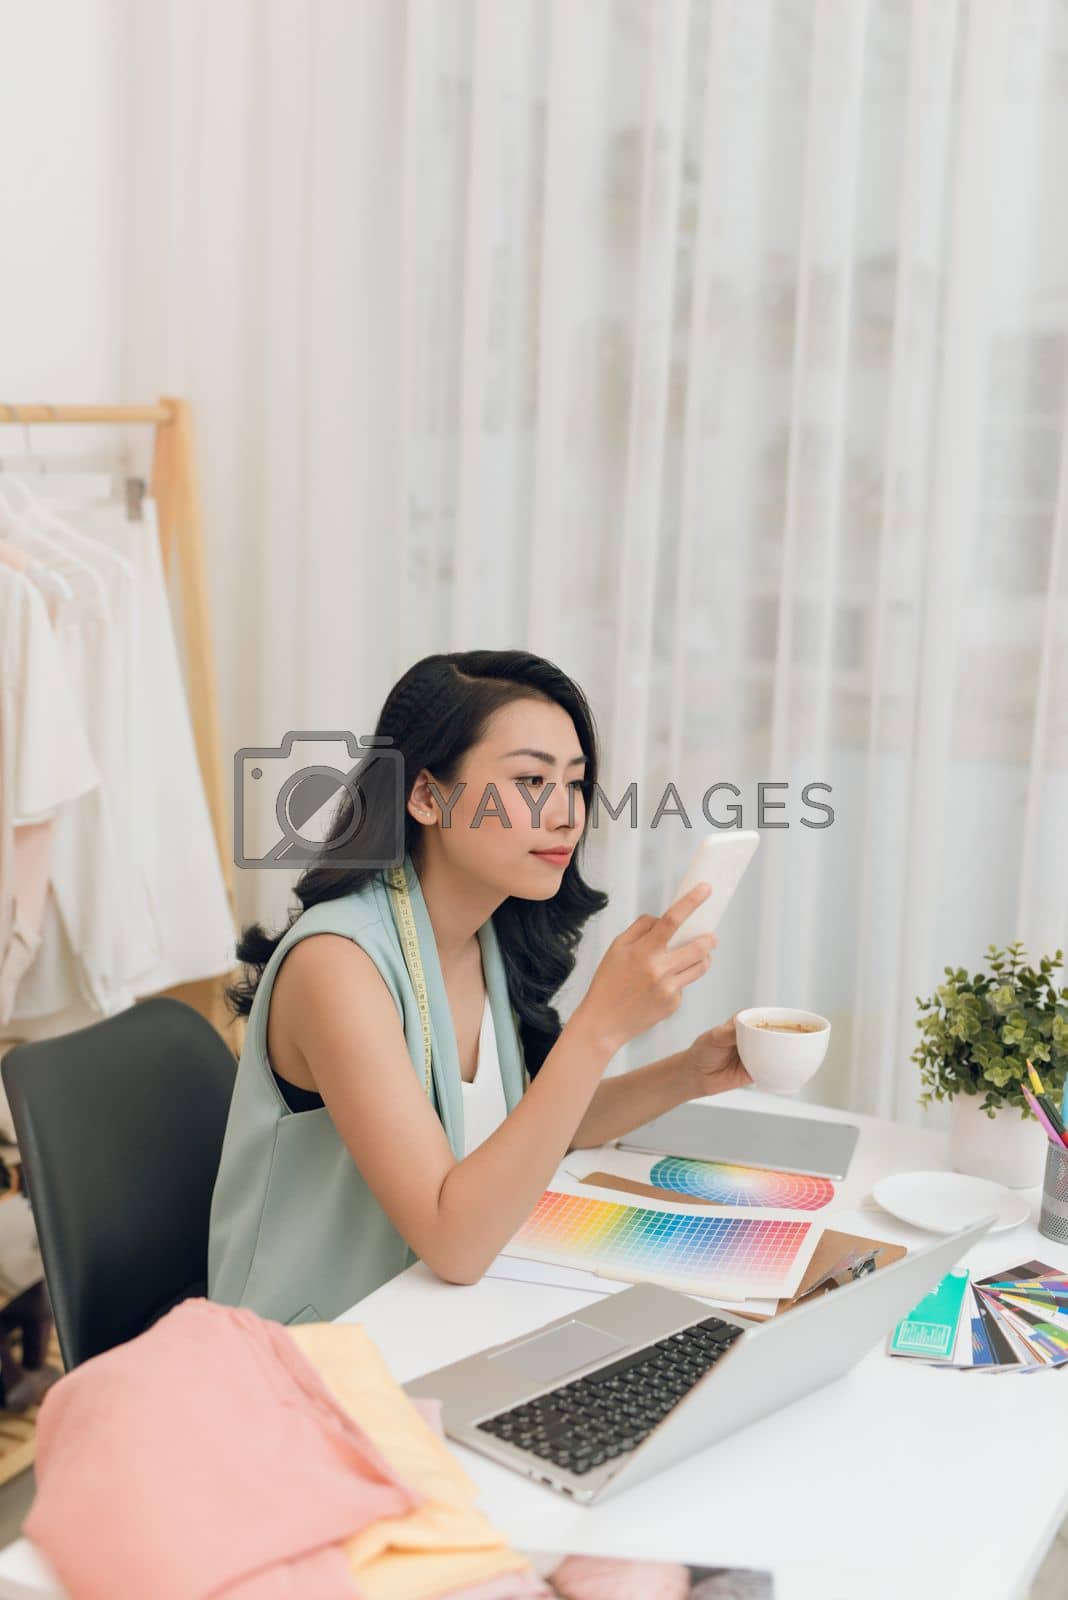 Royalty free image of Fashion designer using smartphone and drinking coffee in her office by makidotvn